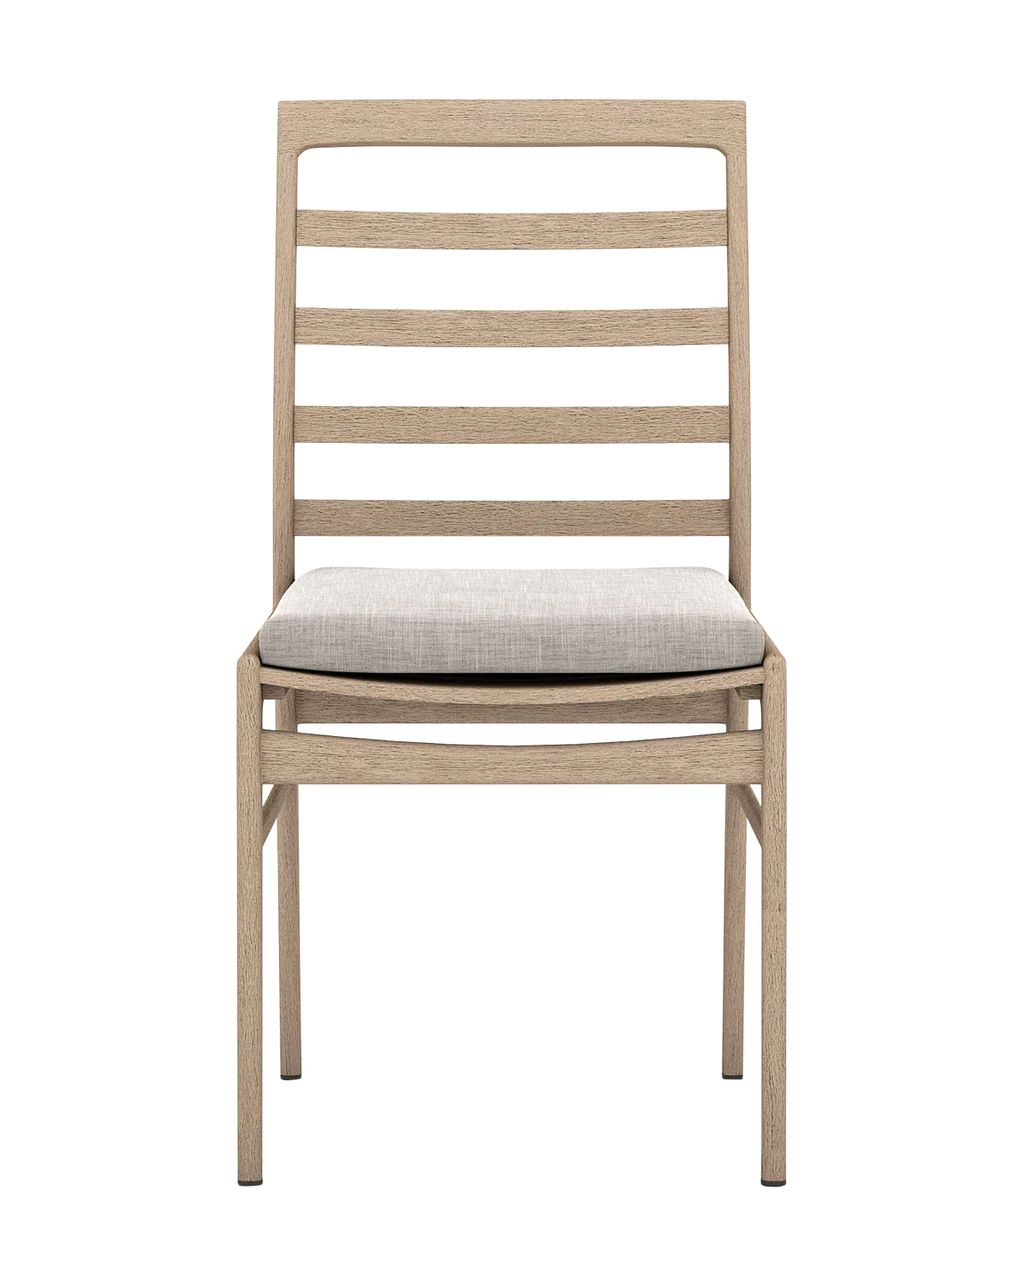 McAlester Chair | McGee & Co.